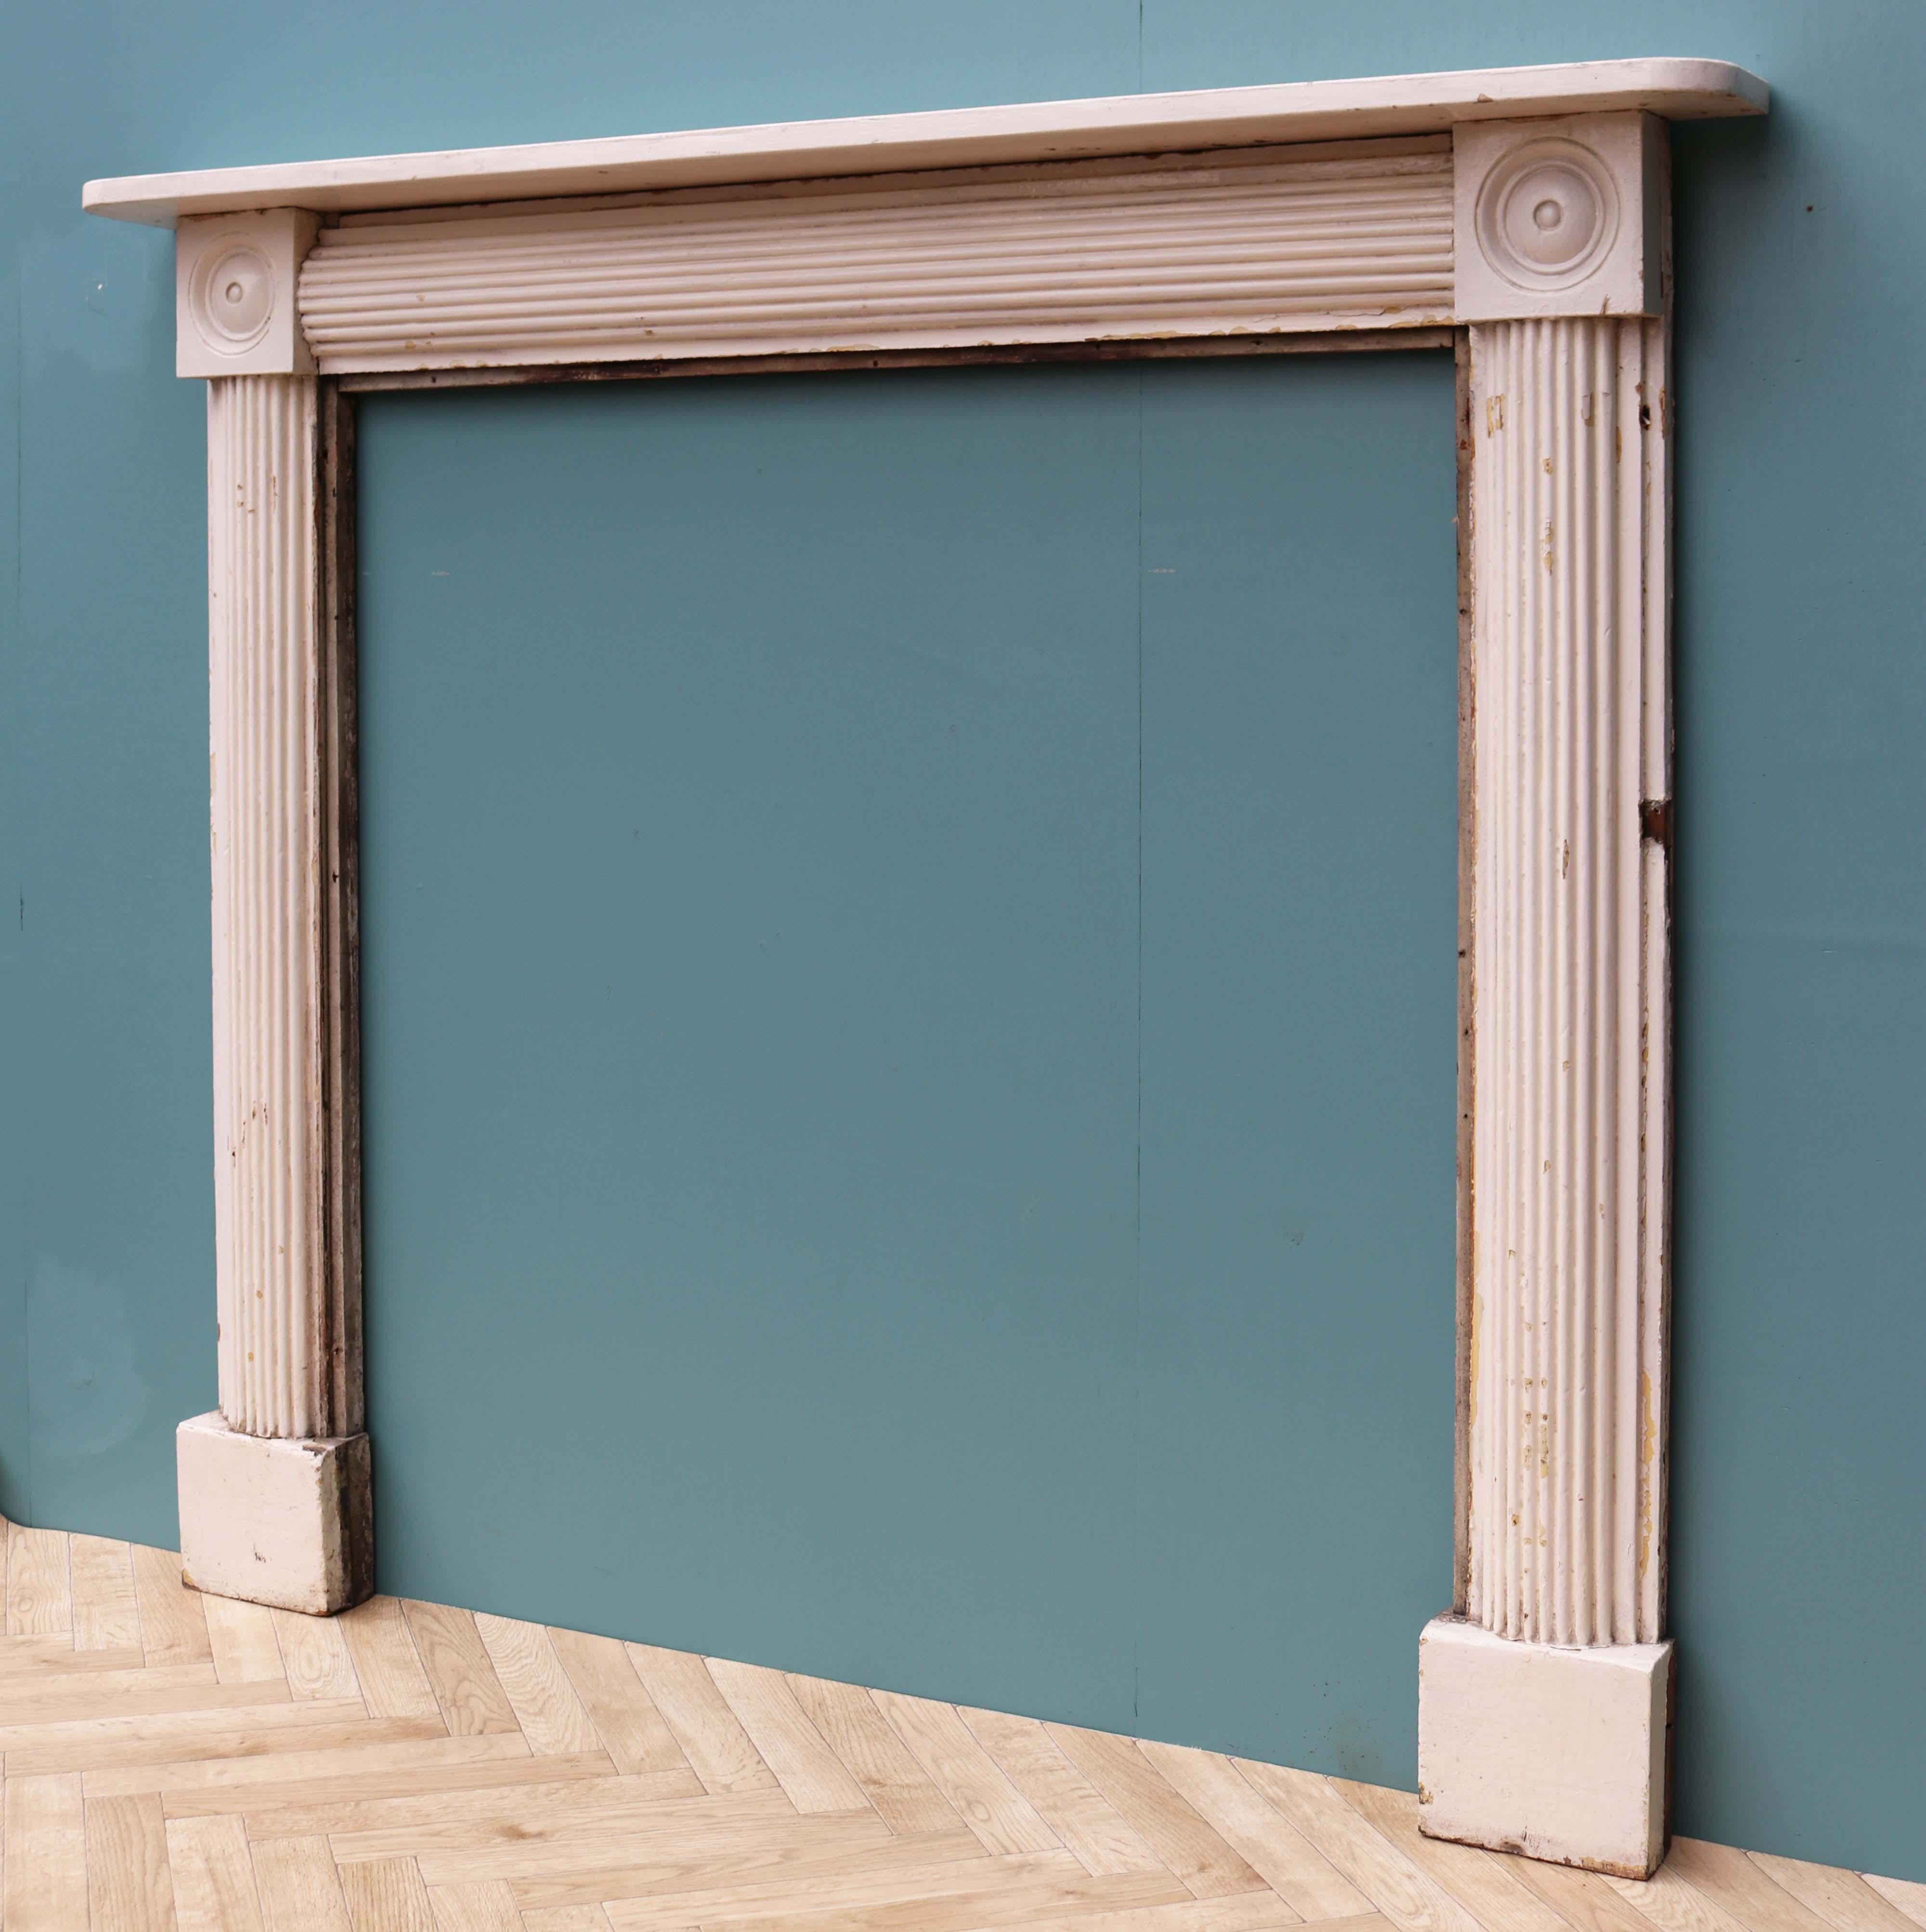 A painted Georgian period bullseye fire surround with fluted frieze and jambs. This fireplace was salvaged from a house in Maidstone, Kent.

Additional dimensions:

Opening height 112.5 cm

Opening width 106 cm

Width between outside of foot